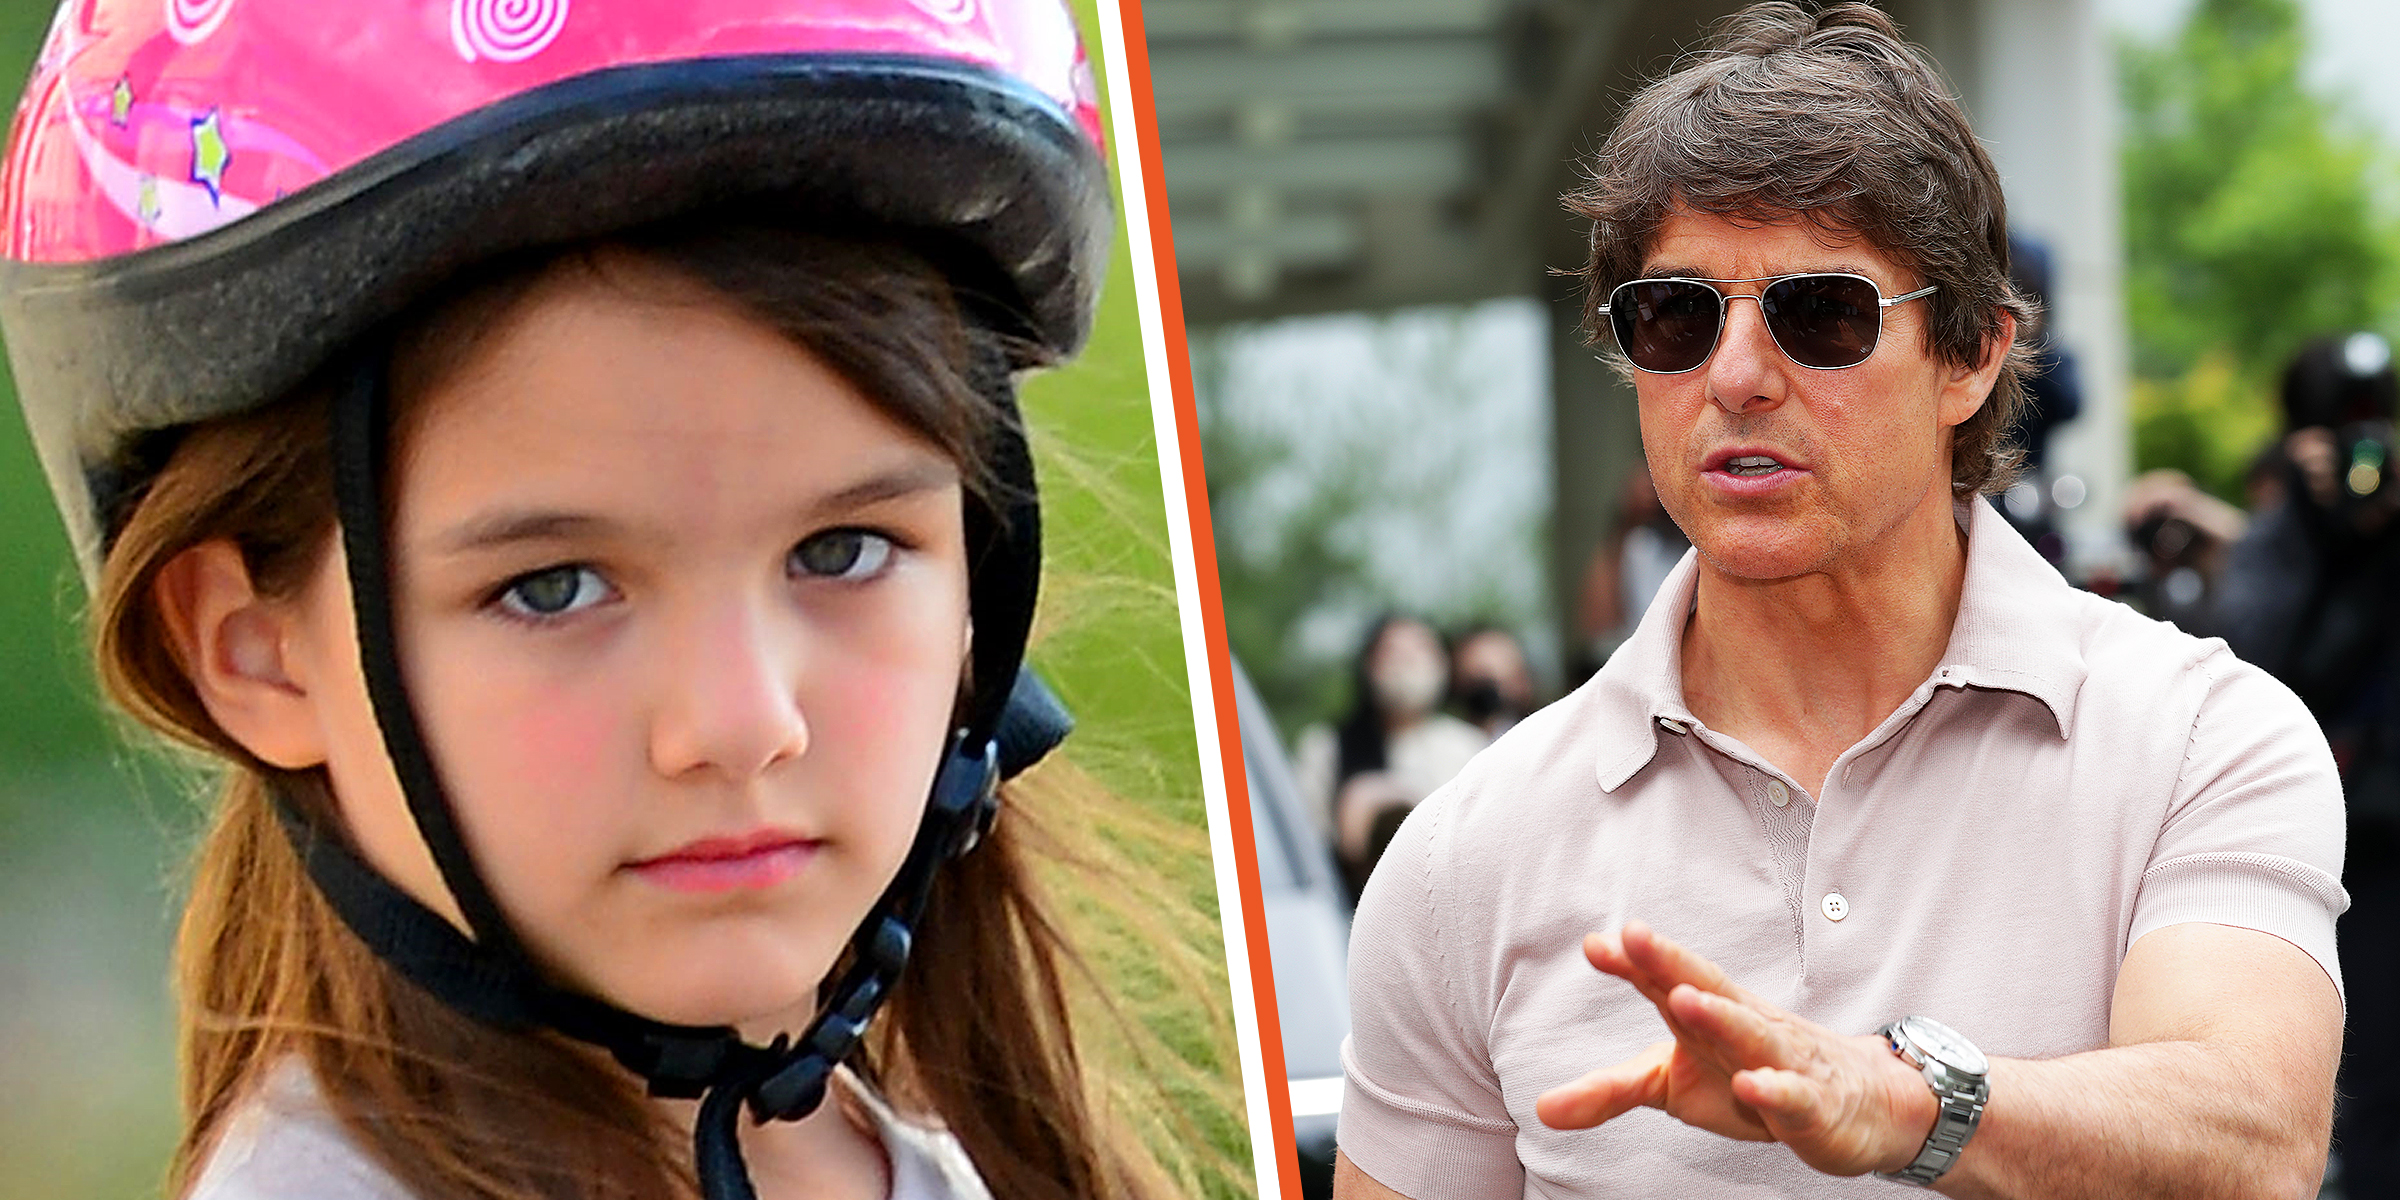 Suri Cruise and her father Tom Cruise. | Source: Getty Images